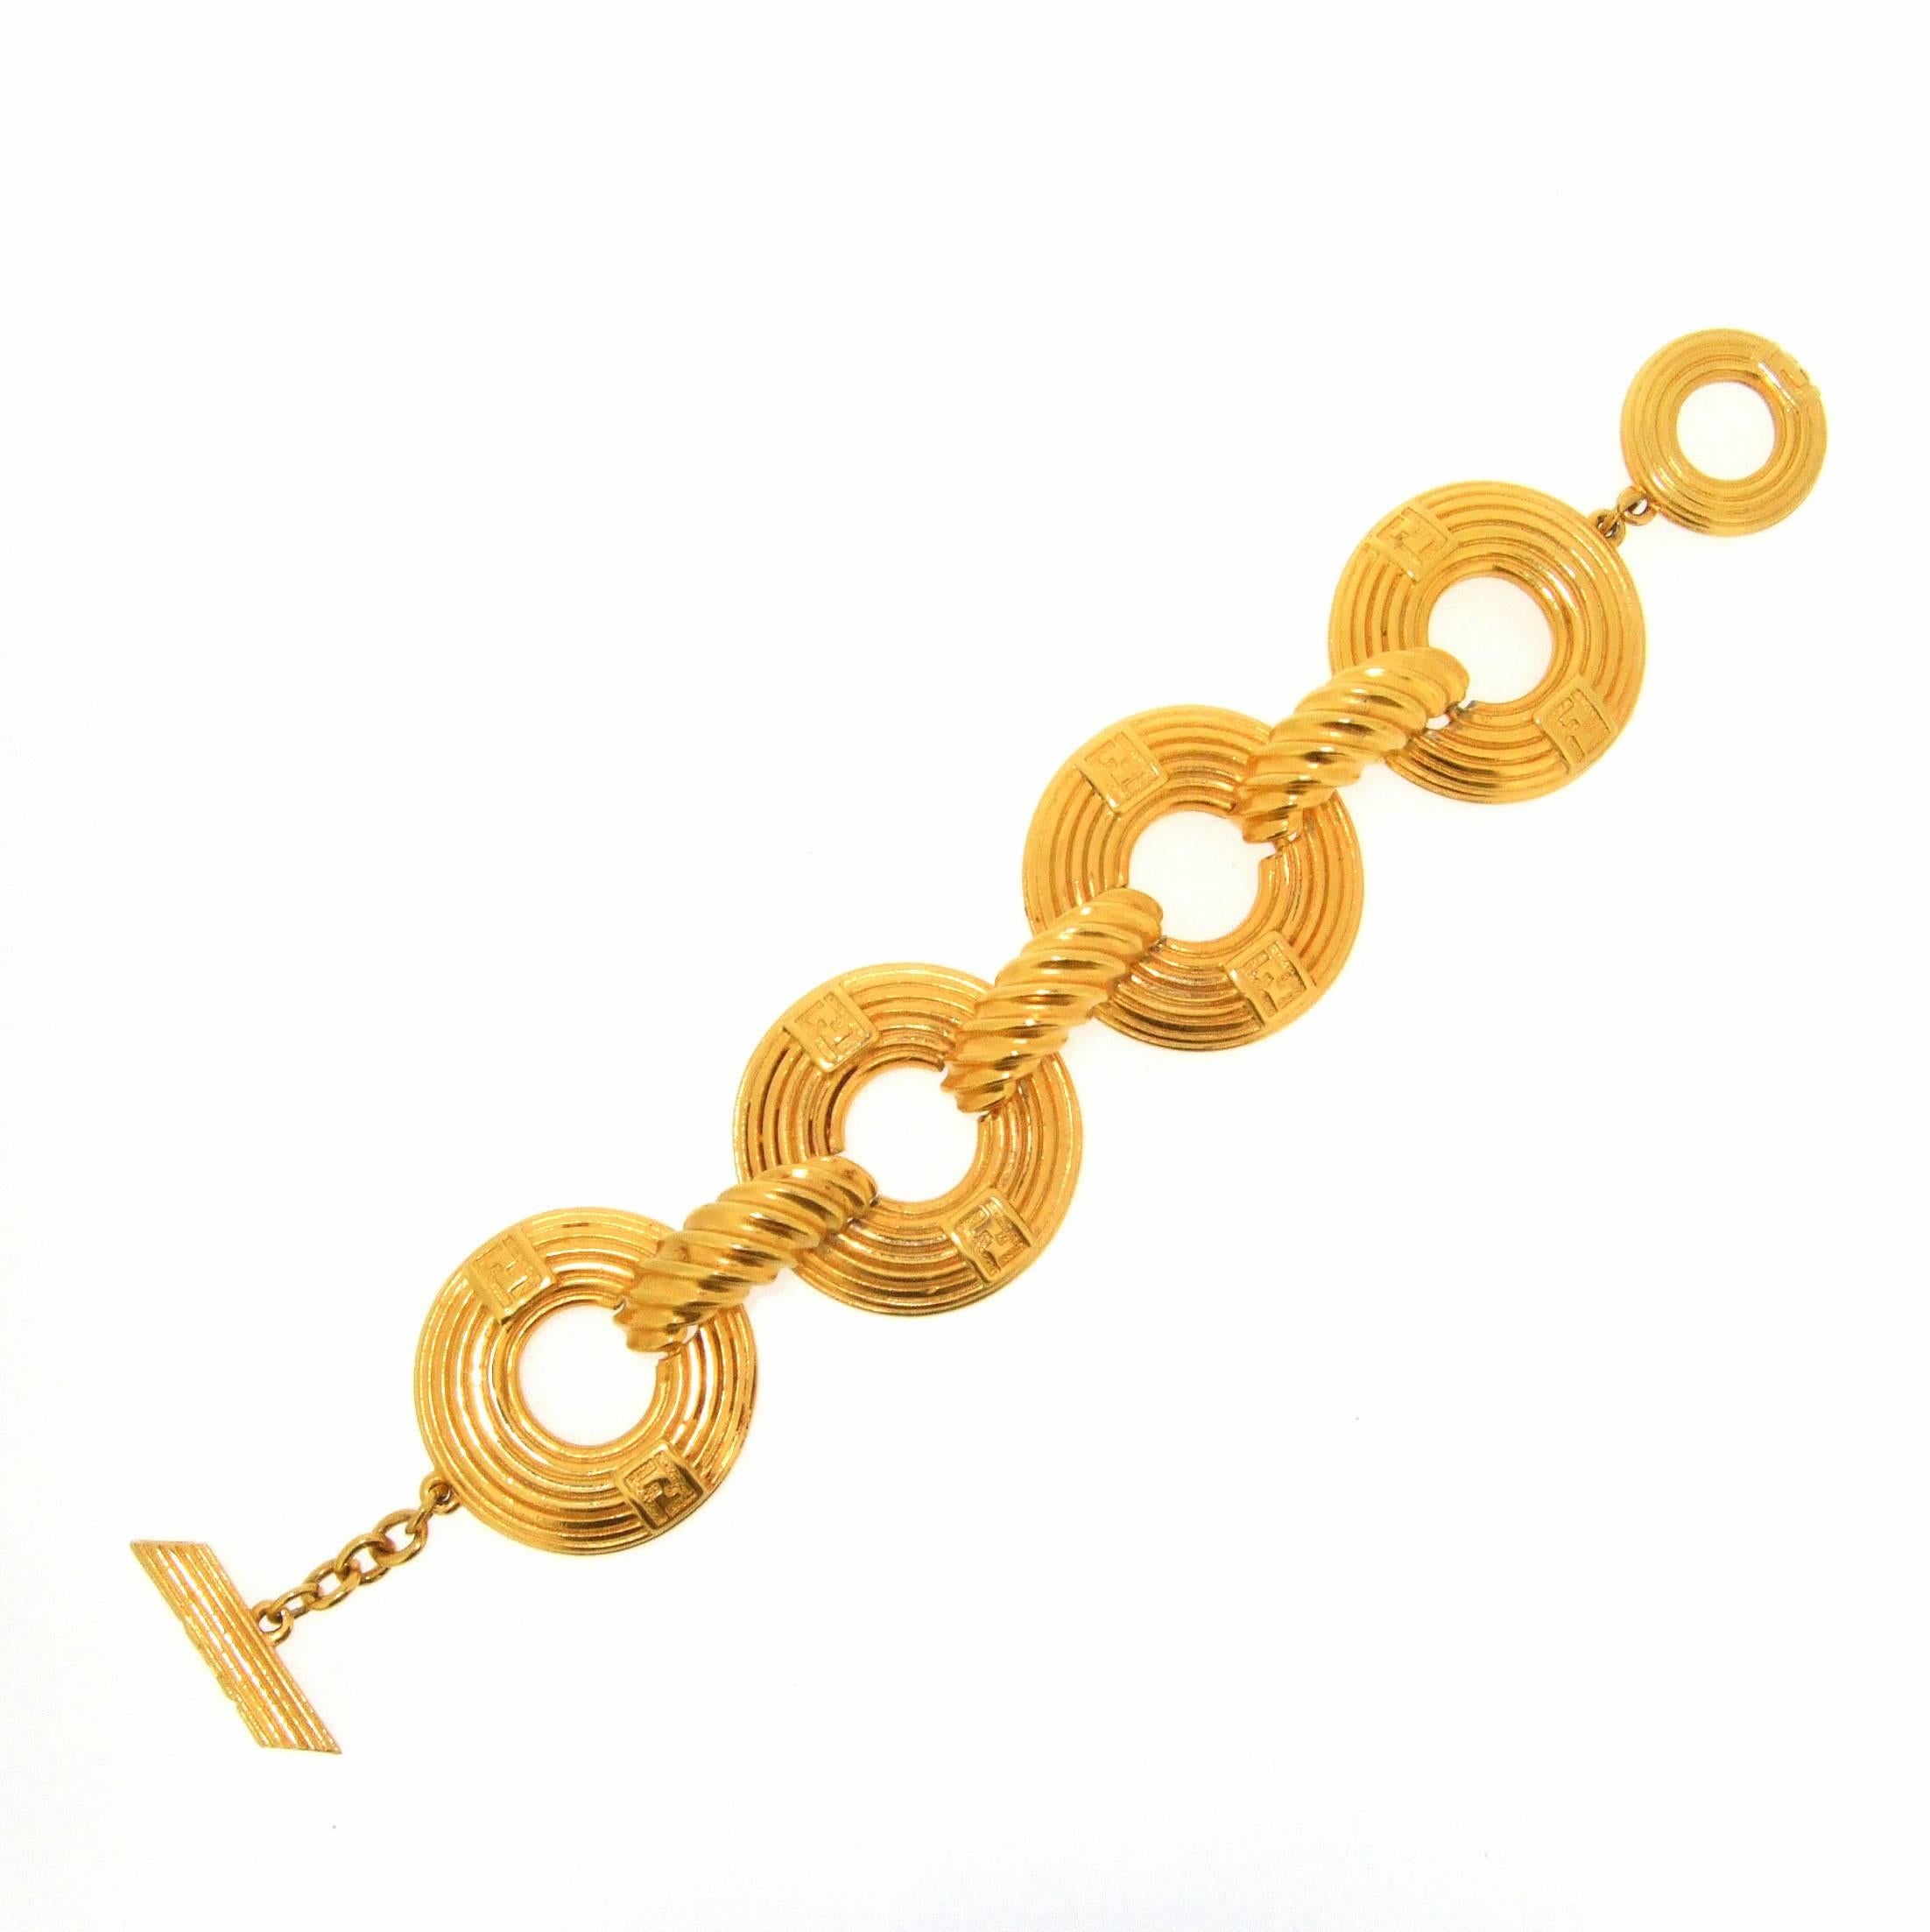 A Vintage Bracelet by Fendi in gold plated metal. Gold hoops joined together with a toggle fastening into a hoop. Each component part is stamped FENDI either once or twice per piece and each hoop is stamped with the FF logo twice on the front.
